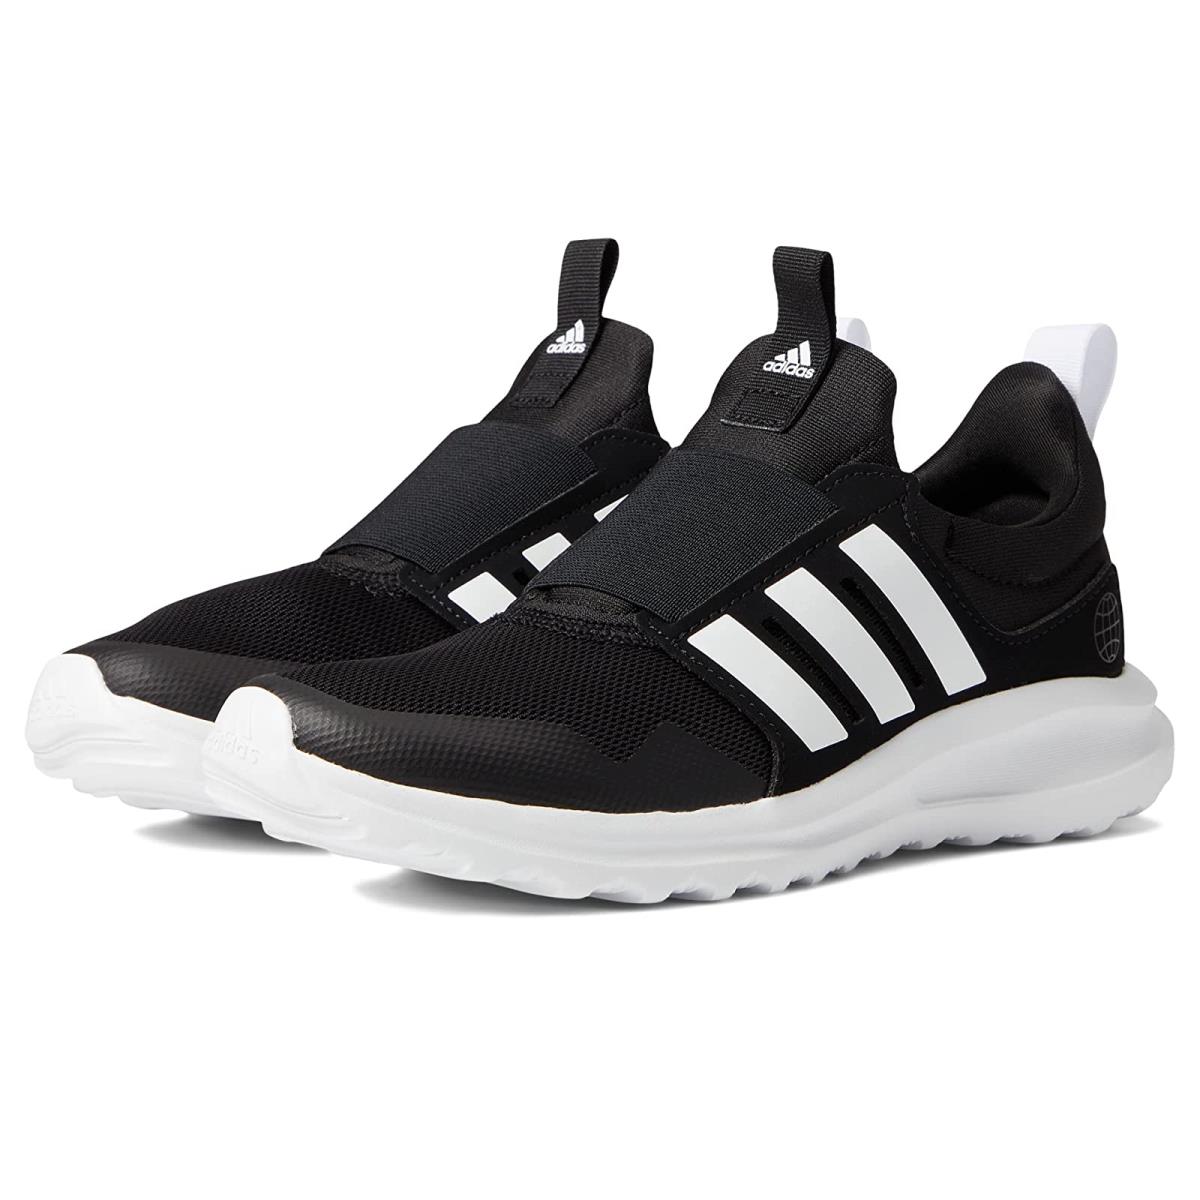 Boy`s Sneakers Athletic Shoes Adidas Kids Activeride 2.0 Little Kid Black/White/Black